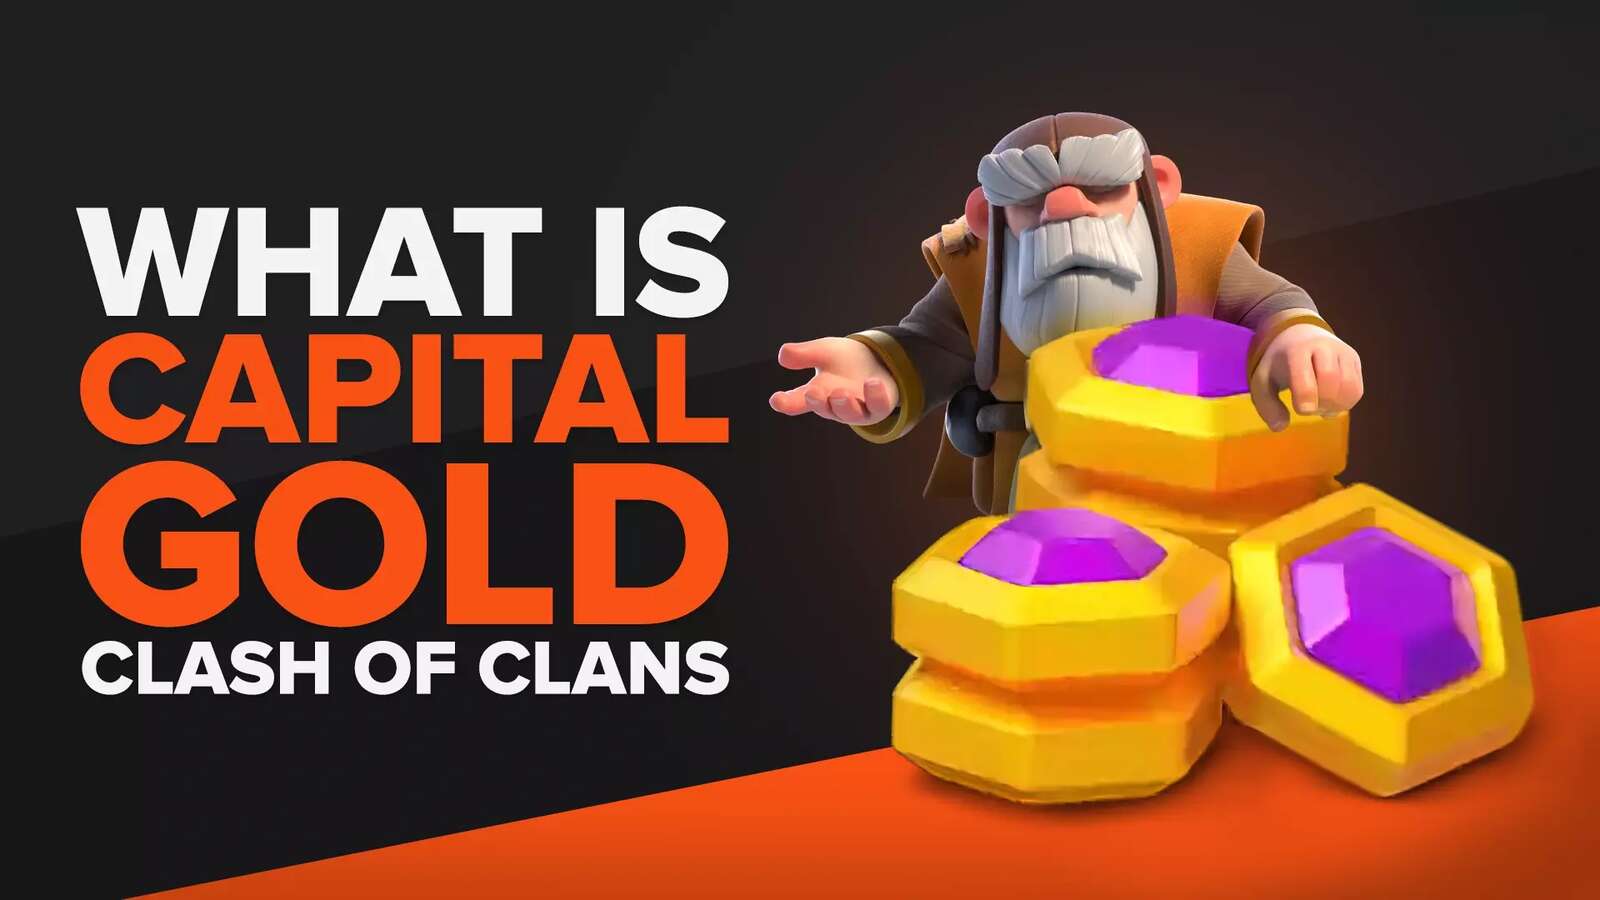 What Is Capital Gold In Clash of Clans?